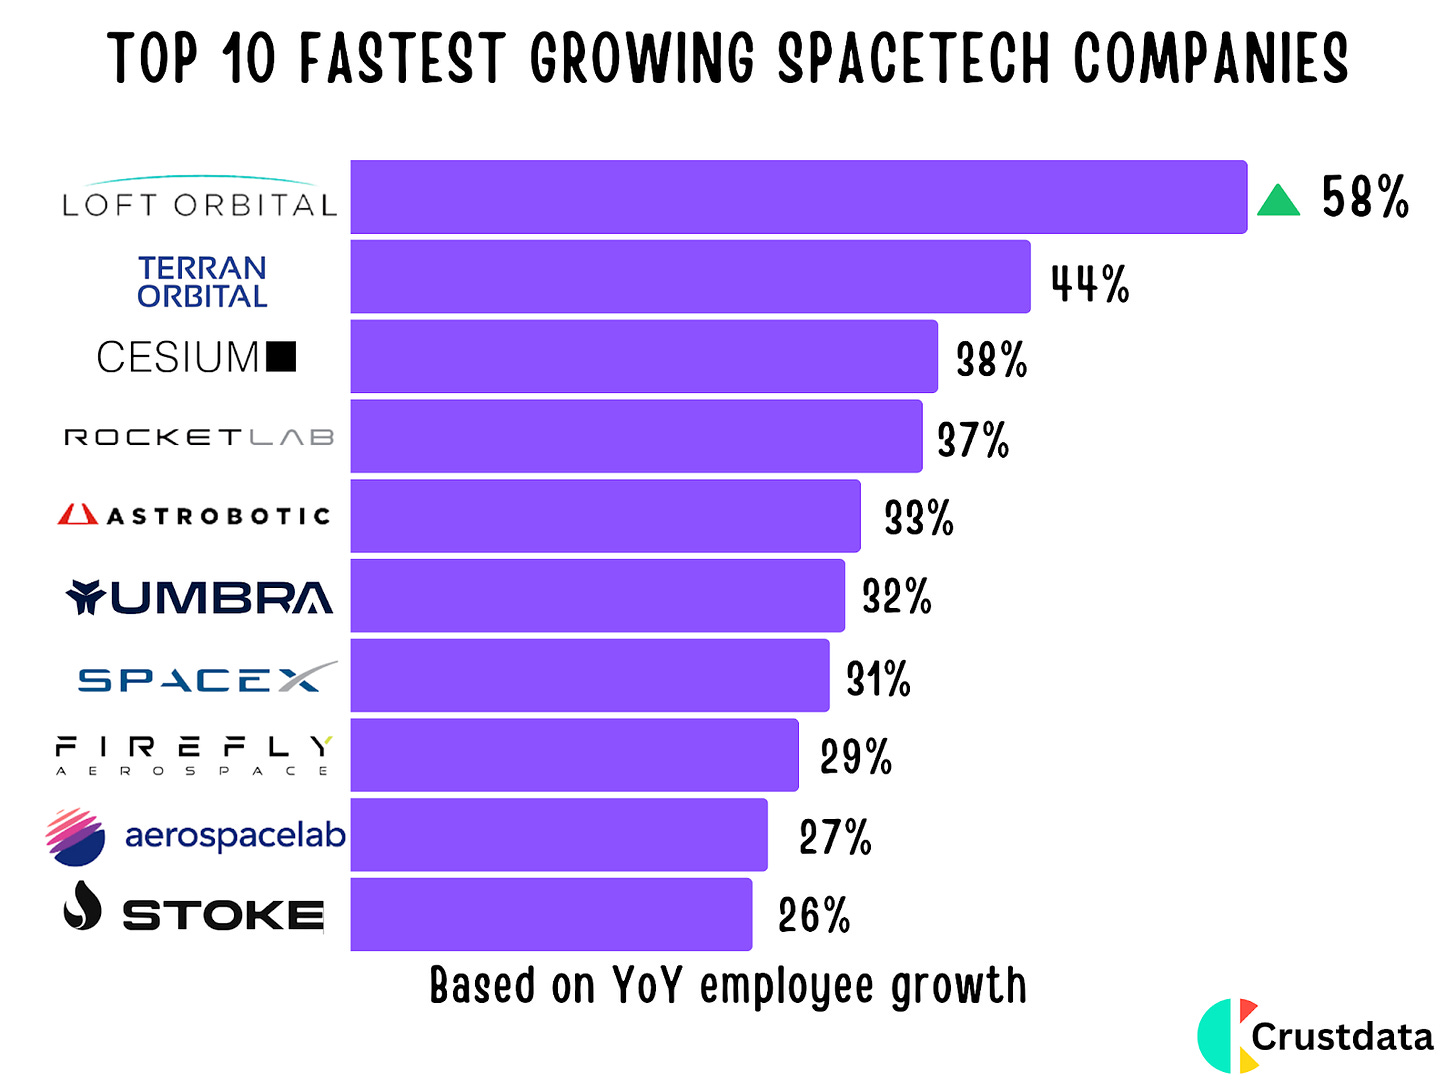 Top 10 Fastest Growing Spacetech Companies